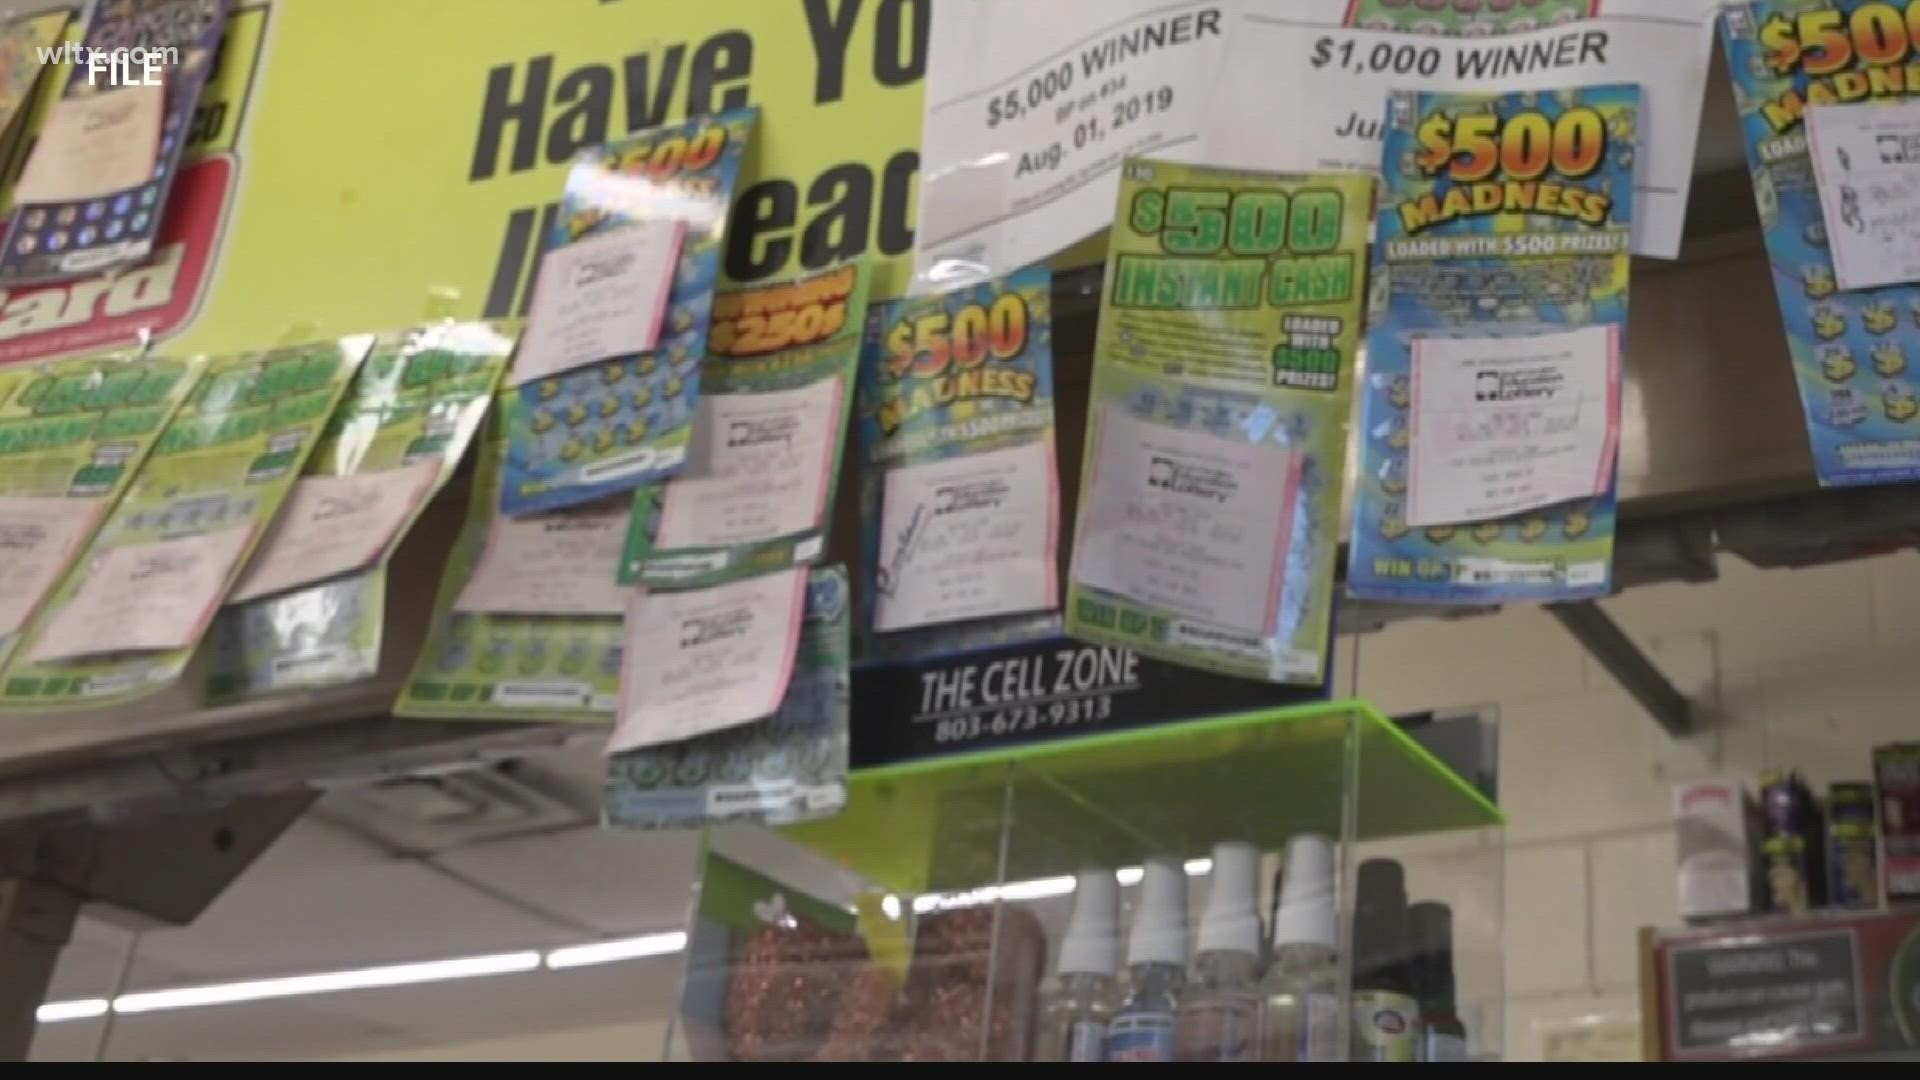 The woman bought a $5 scratch off lottery ticket for the big win.